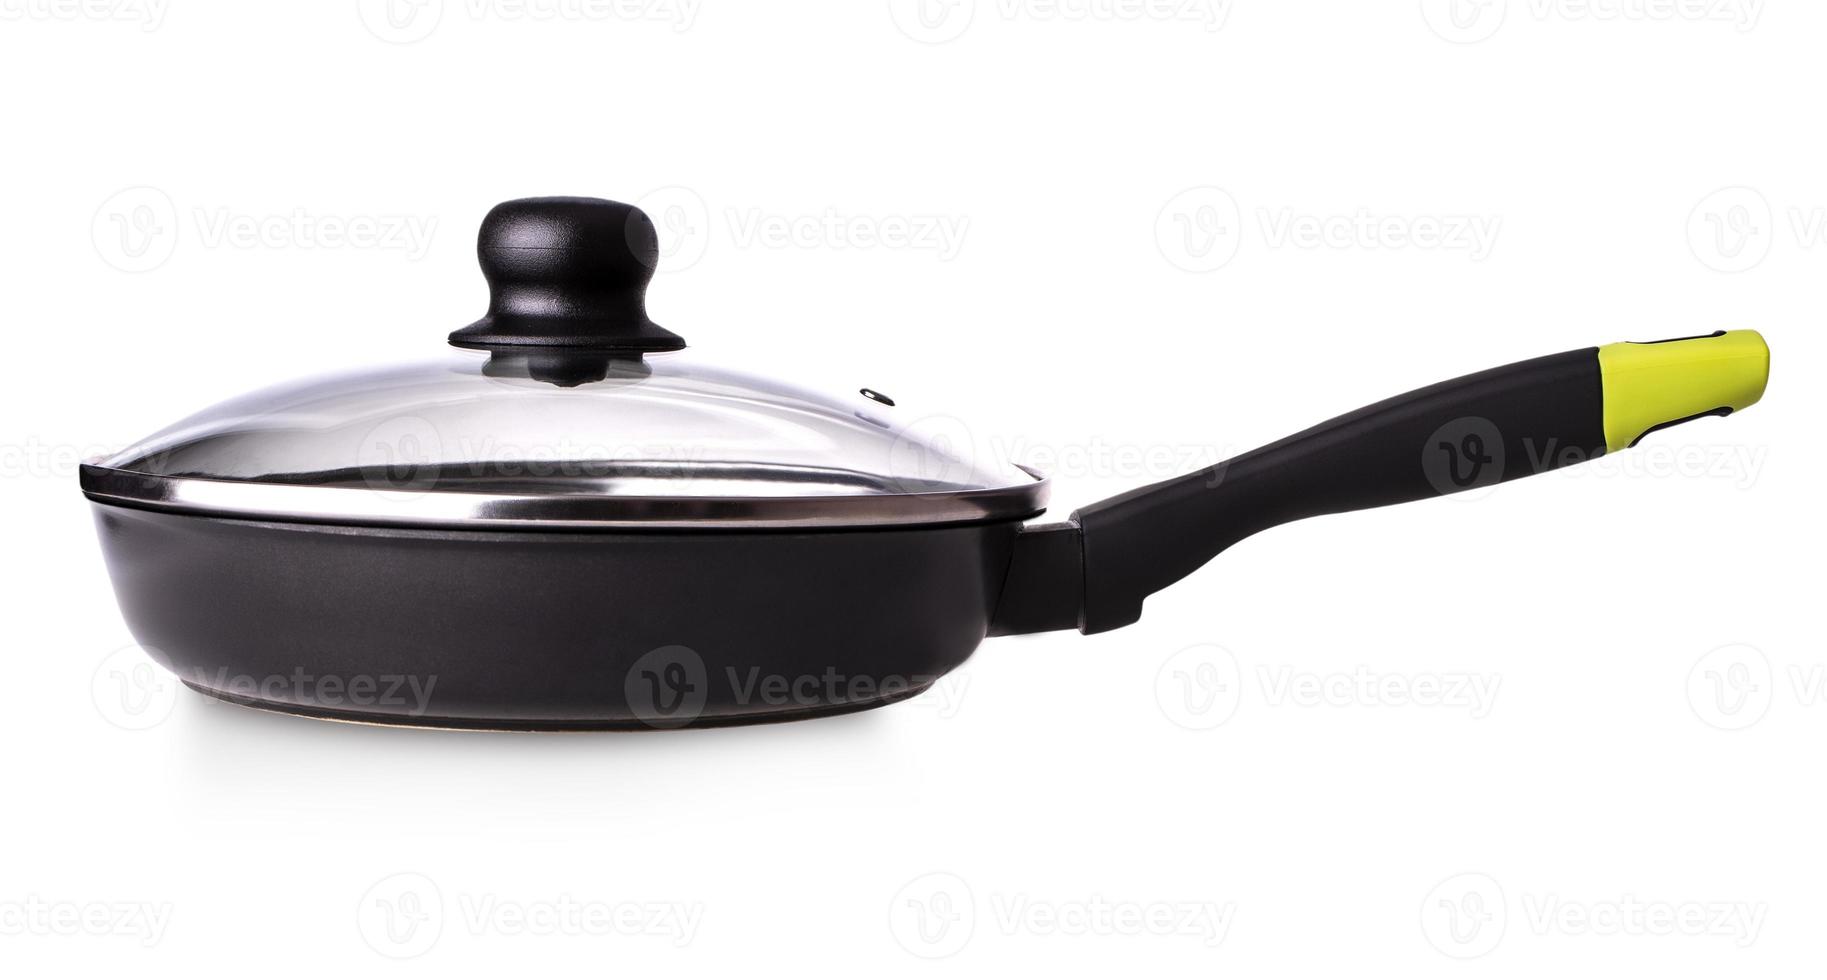 The frying pan with glass can isolated on white background close up photo